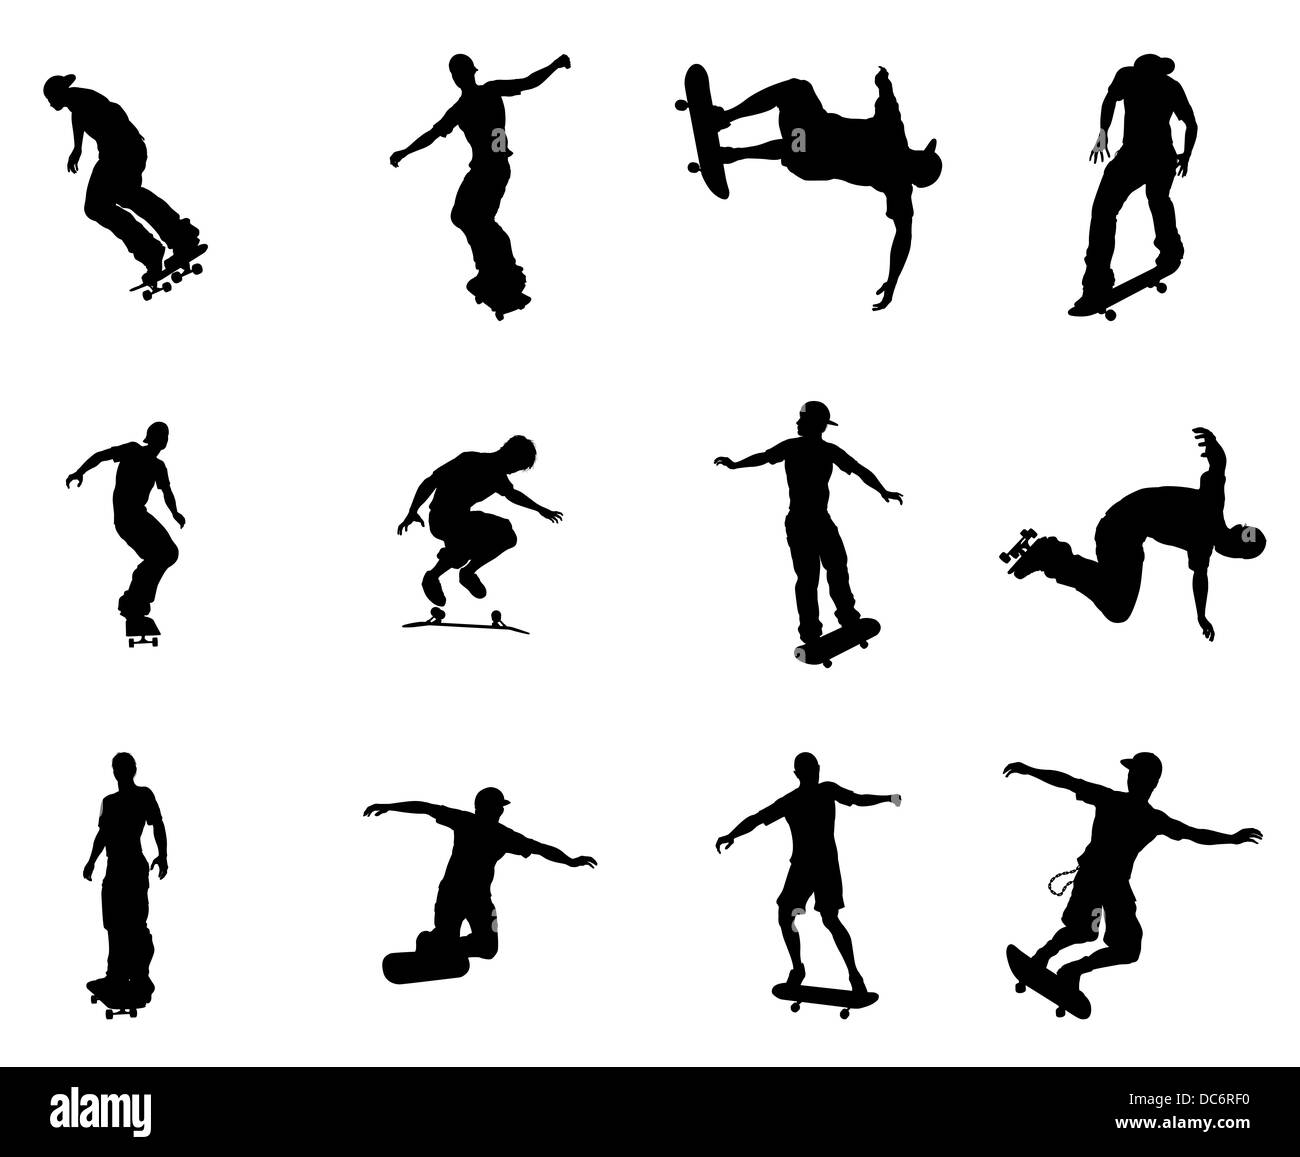 Very high quality and highly detailed skating skateboarder silhouette outlines. Stock Photo